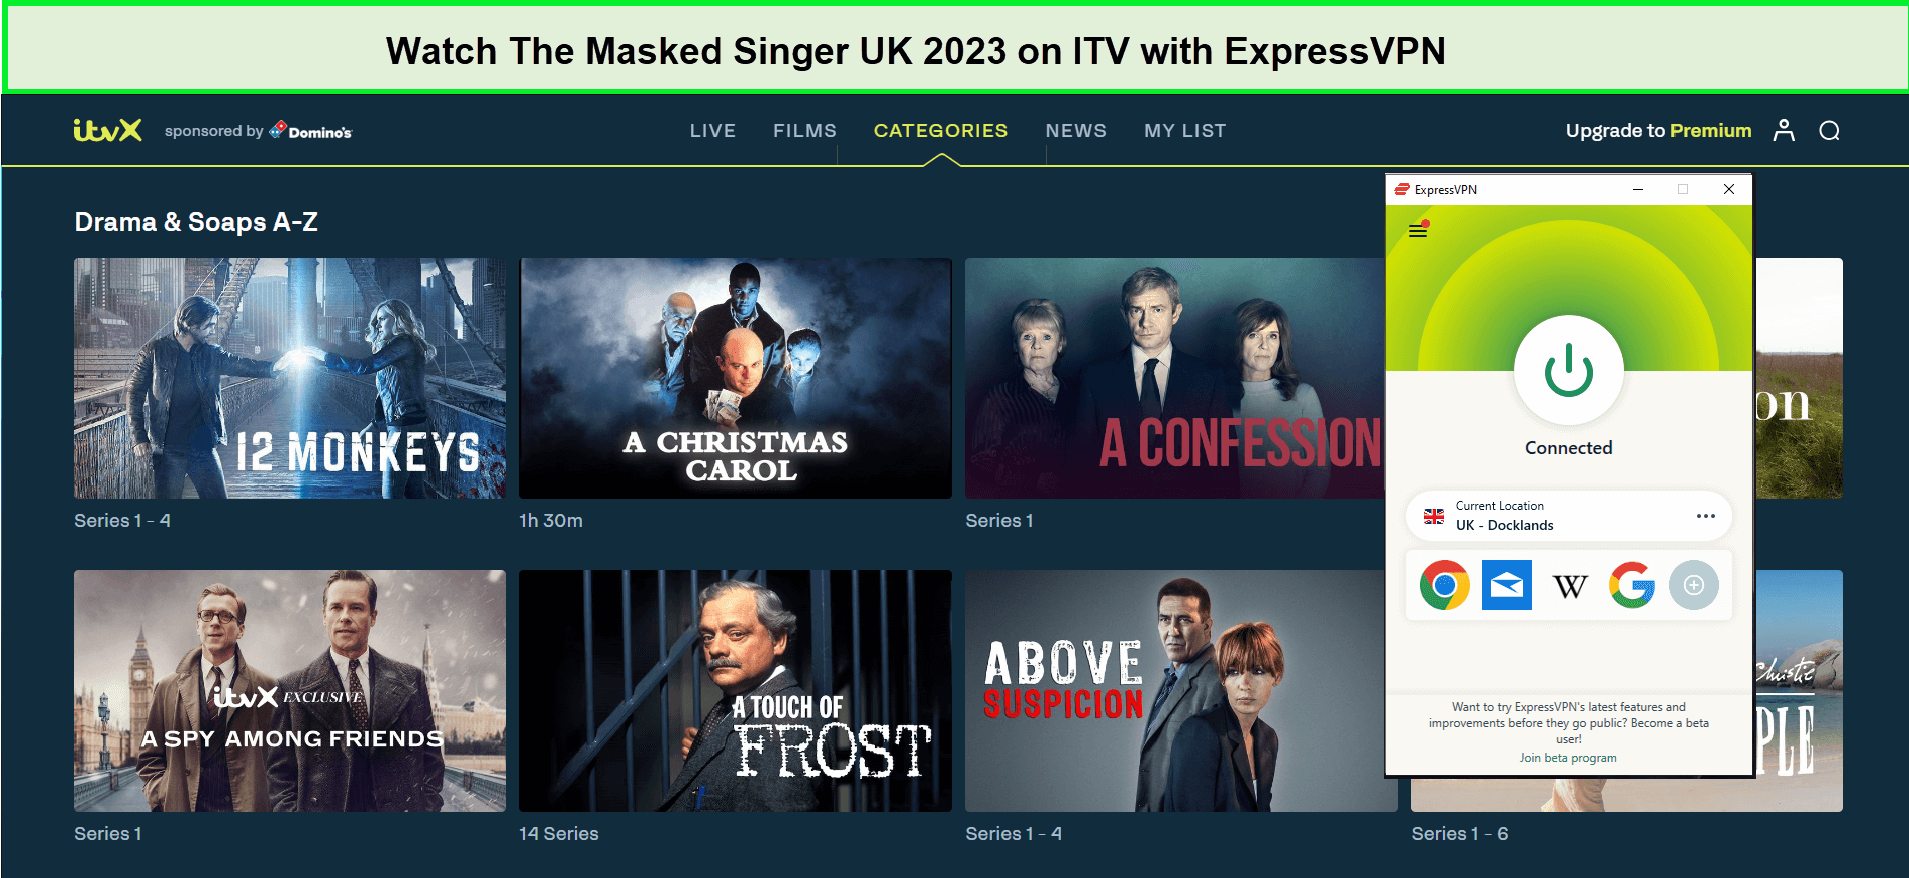 Watch-The-Masked-Singer-UK-2023-in-India-on-ITV-with-ExpressVPN